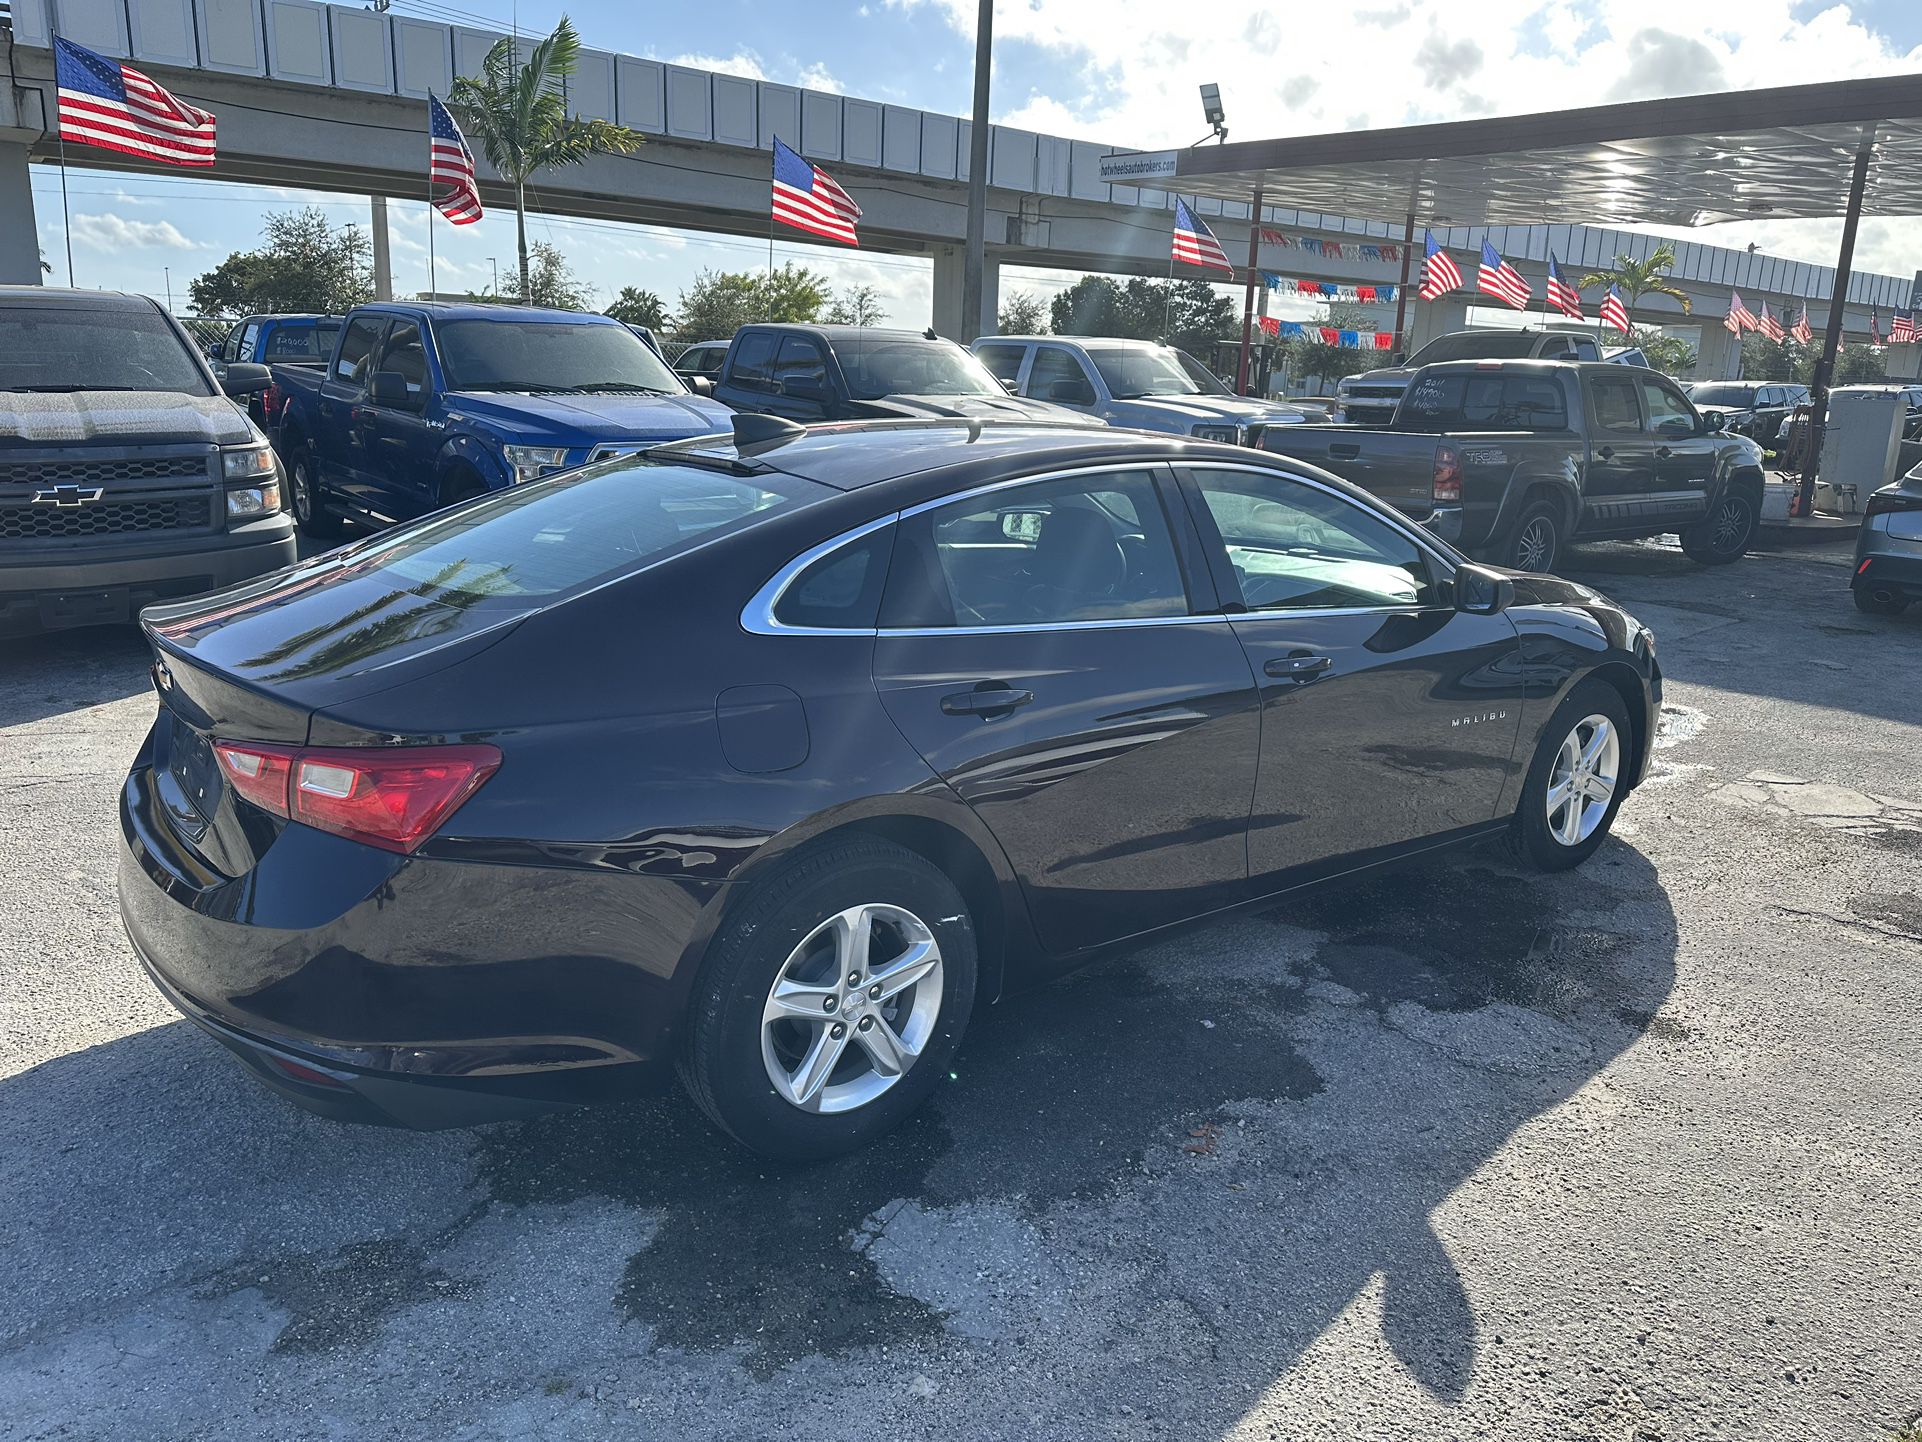 used 2018 chevy malibu - front view 2